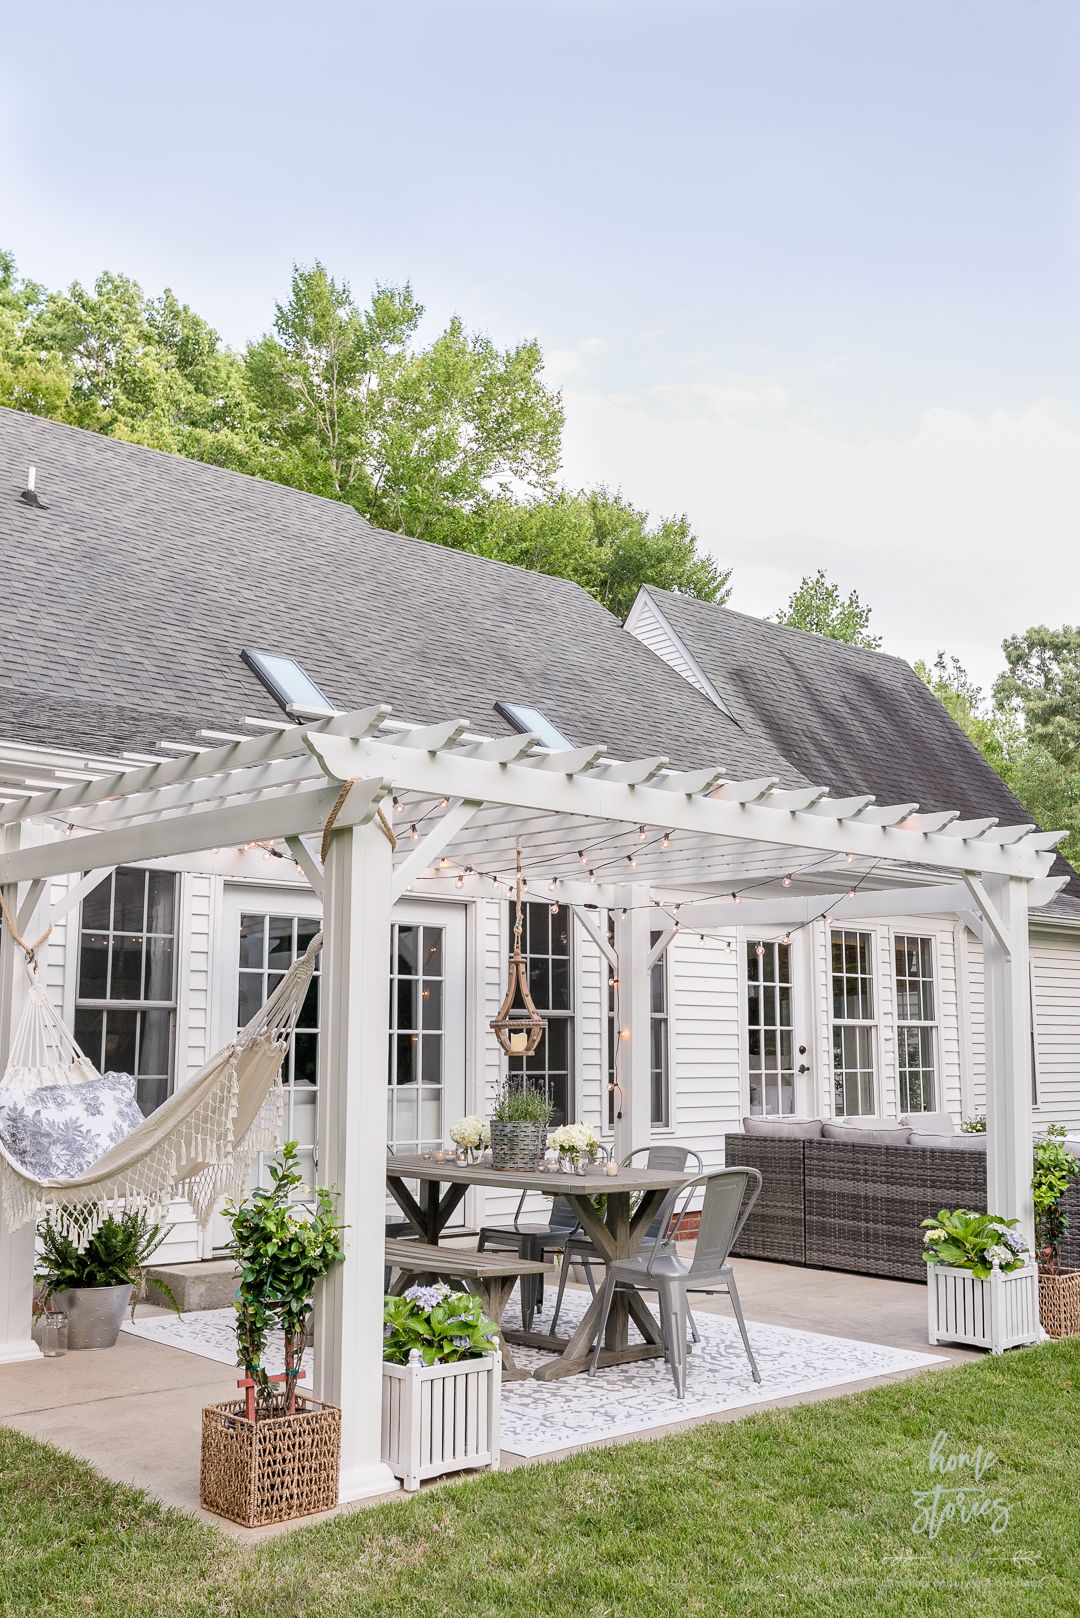 Stylish Patio Ideas: Enhance Your Outdoor Space with a Pergola